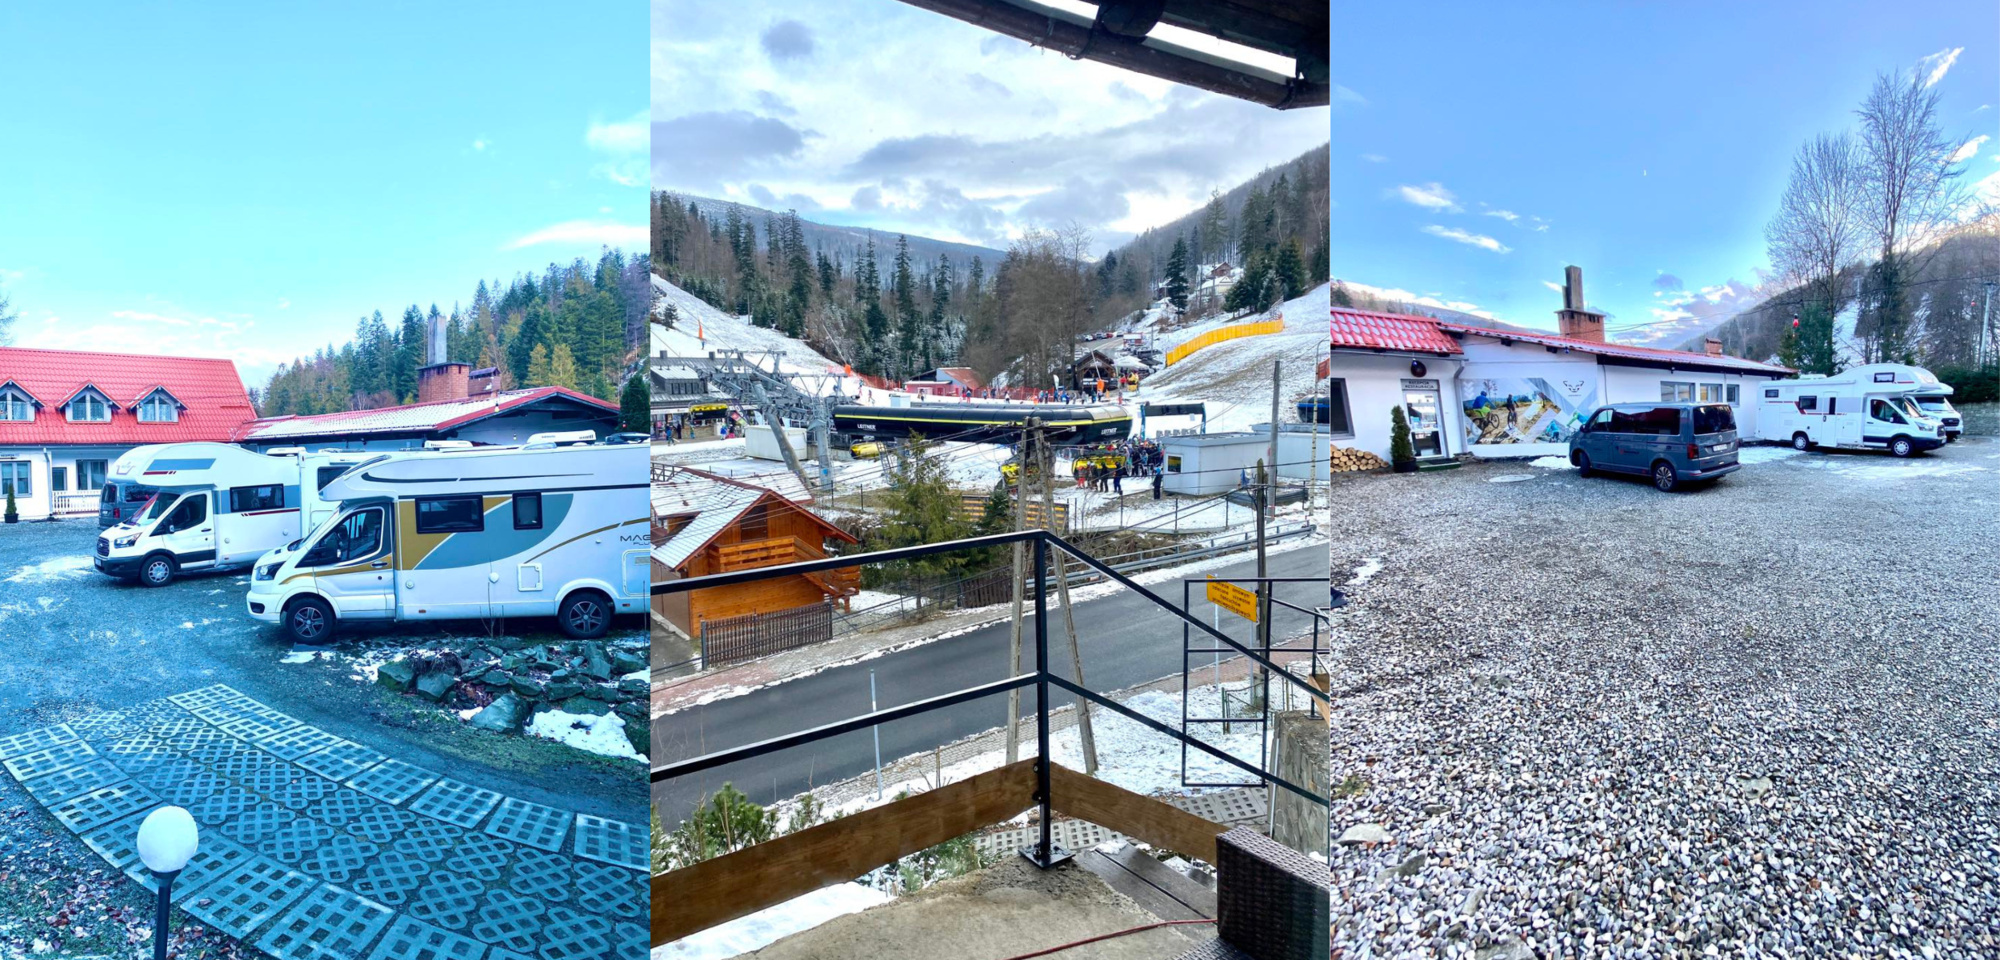 Campervan for the winter holidays! 5 interesting destinations for traveling by motorhome in winter – image 4